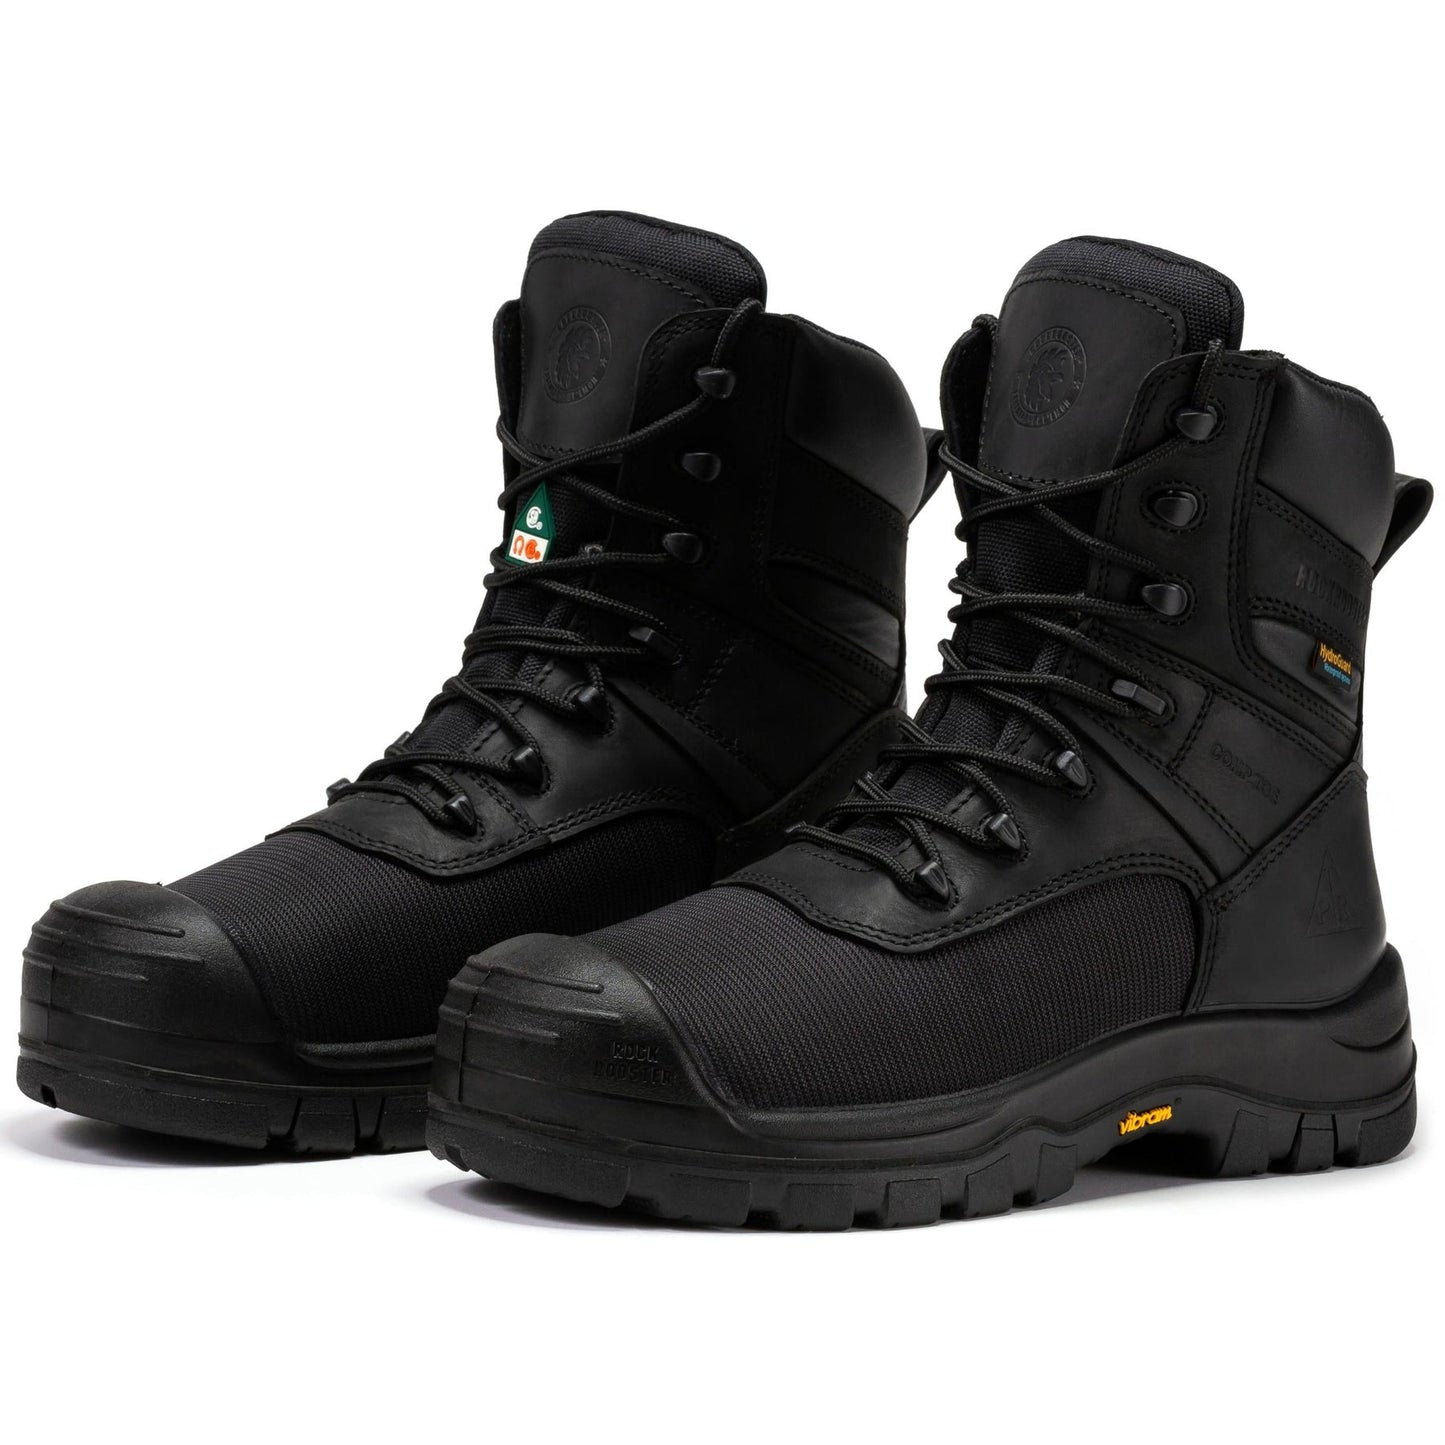 8” Waterproof Composite Toe Work Boots (CSA Approved) - The Beaufort